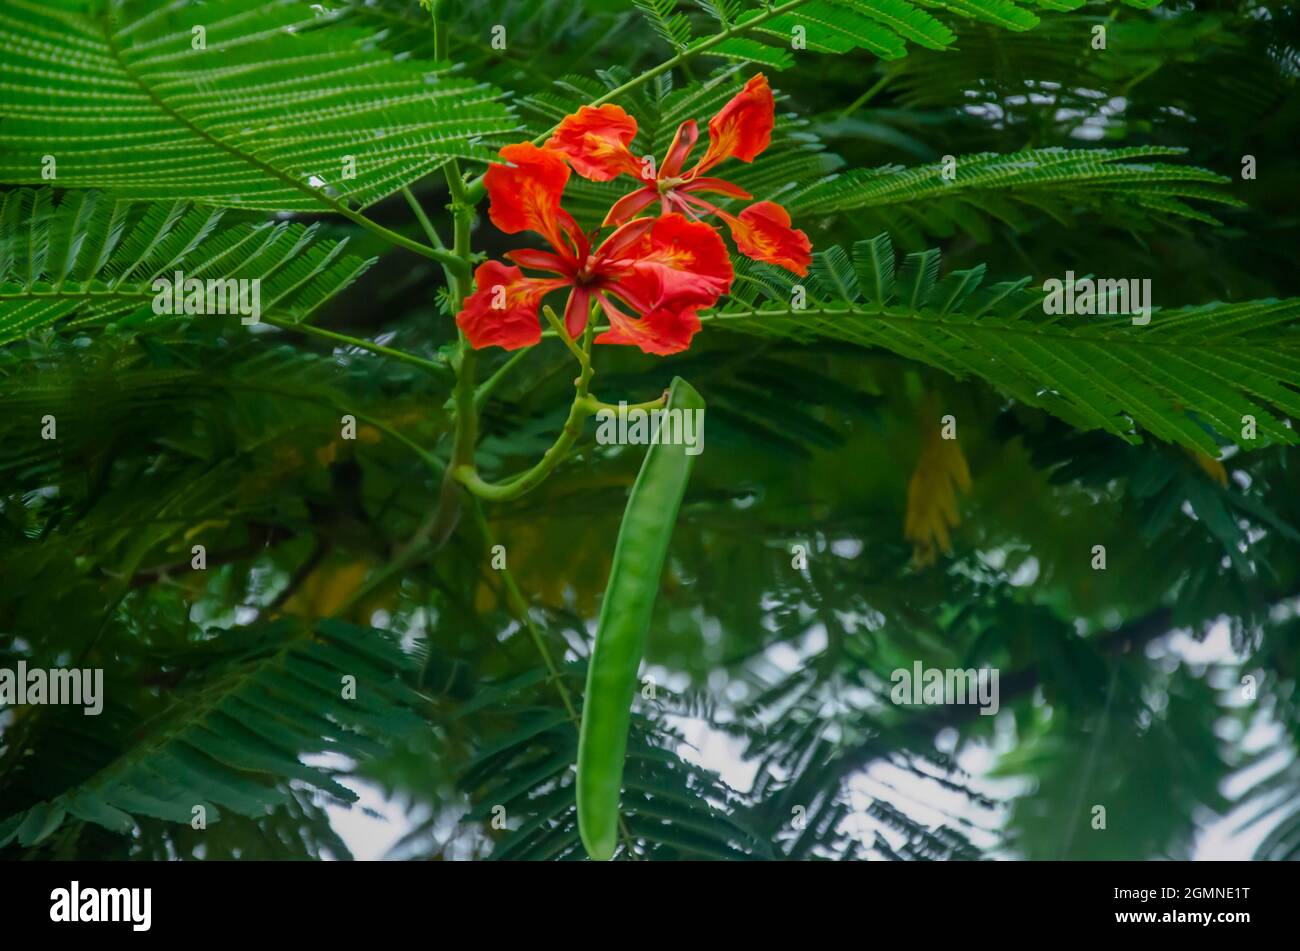 Selective focus on ROYAL POINCIANA tree and red flower and green long fruit with green leaves isolated with green blur background in morning sunshine Stock Photo